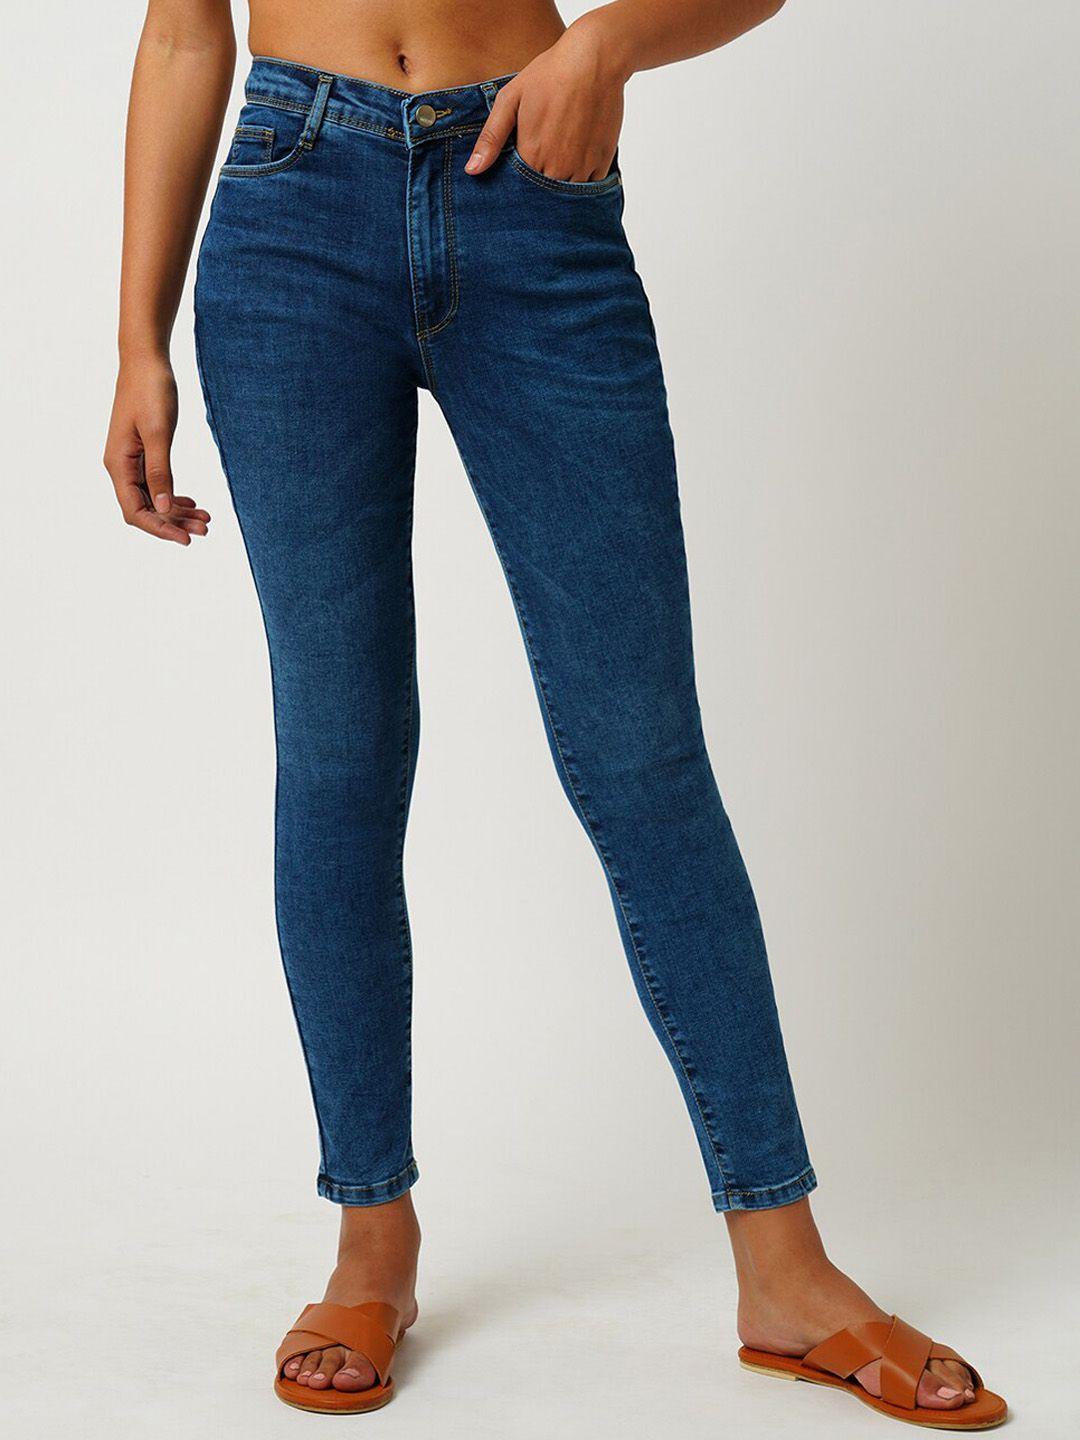 kraus-jeans-women-skinny-fit-high-rise-light-fade-stretchable-jeans